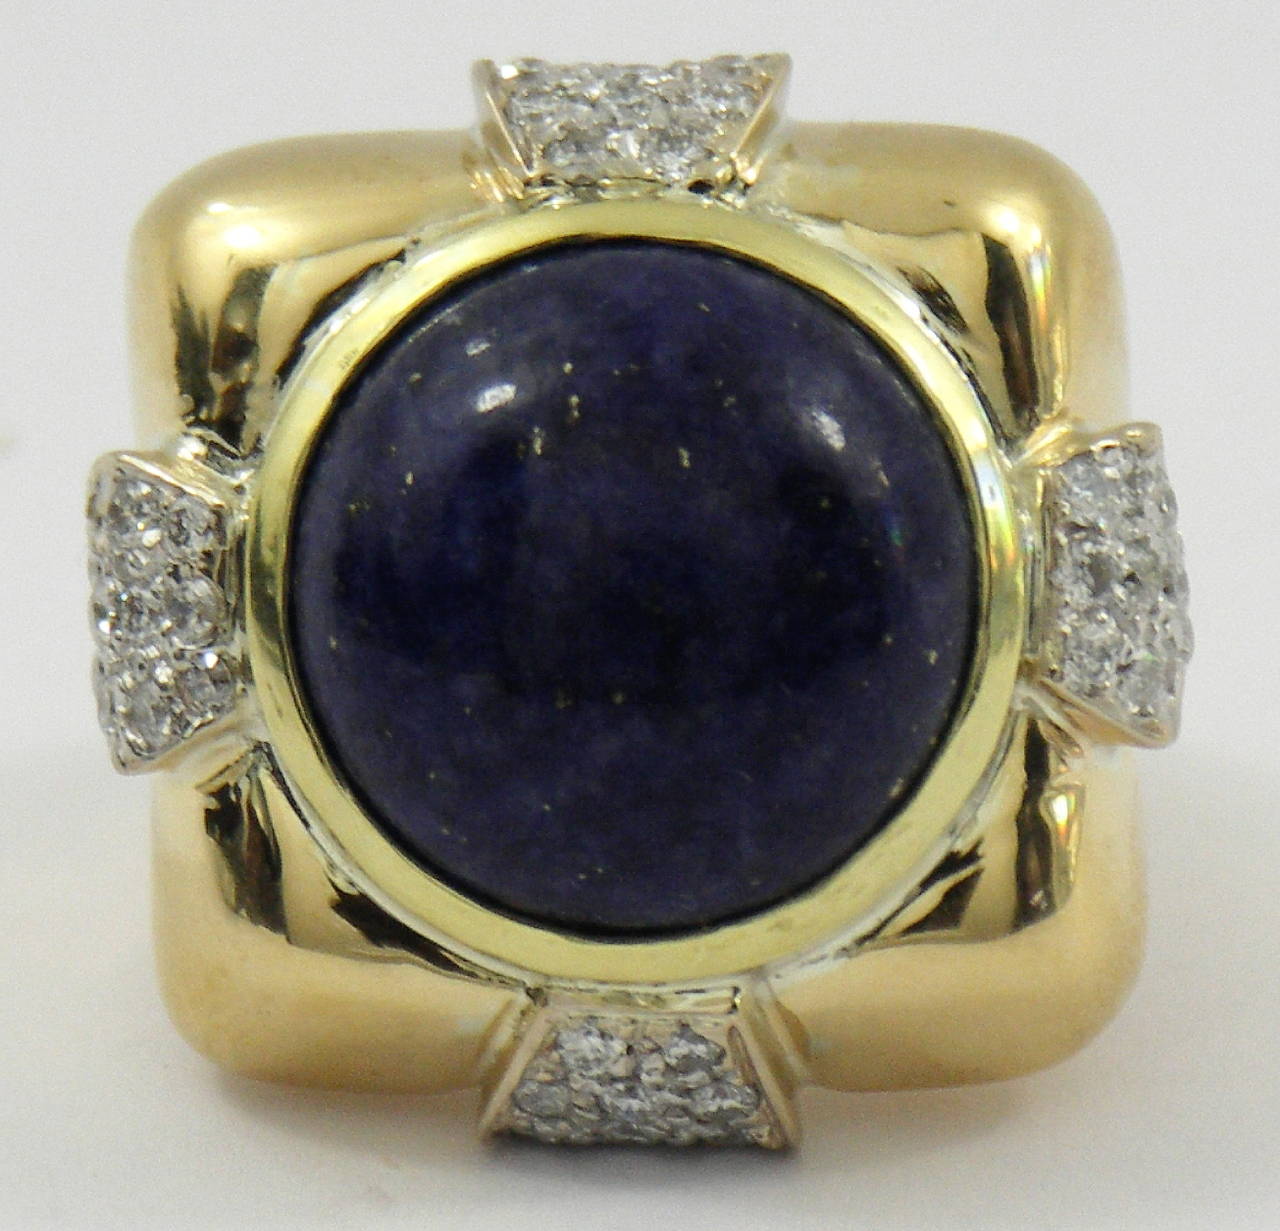 An 18K yellow gold ring signed A. Clunn, and set with 50 diamonds, weighing 2ct total approximate weight. The center is set with a round, cabochon cut Lapis Lazuli, measuring 17mm. 
Size 6 1/2